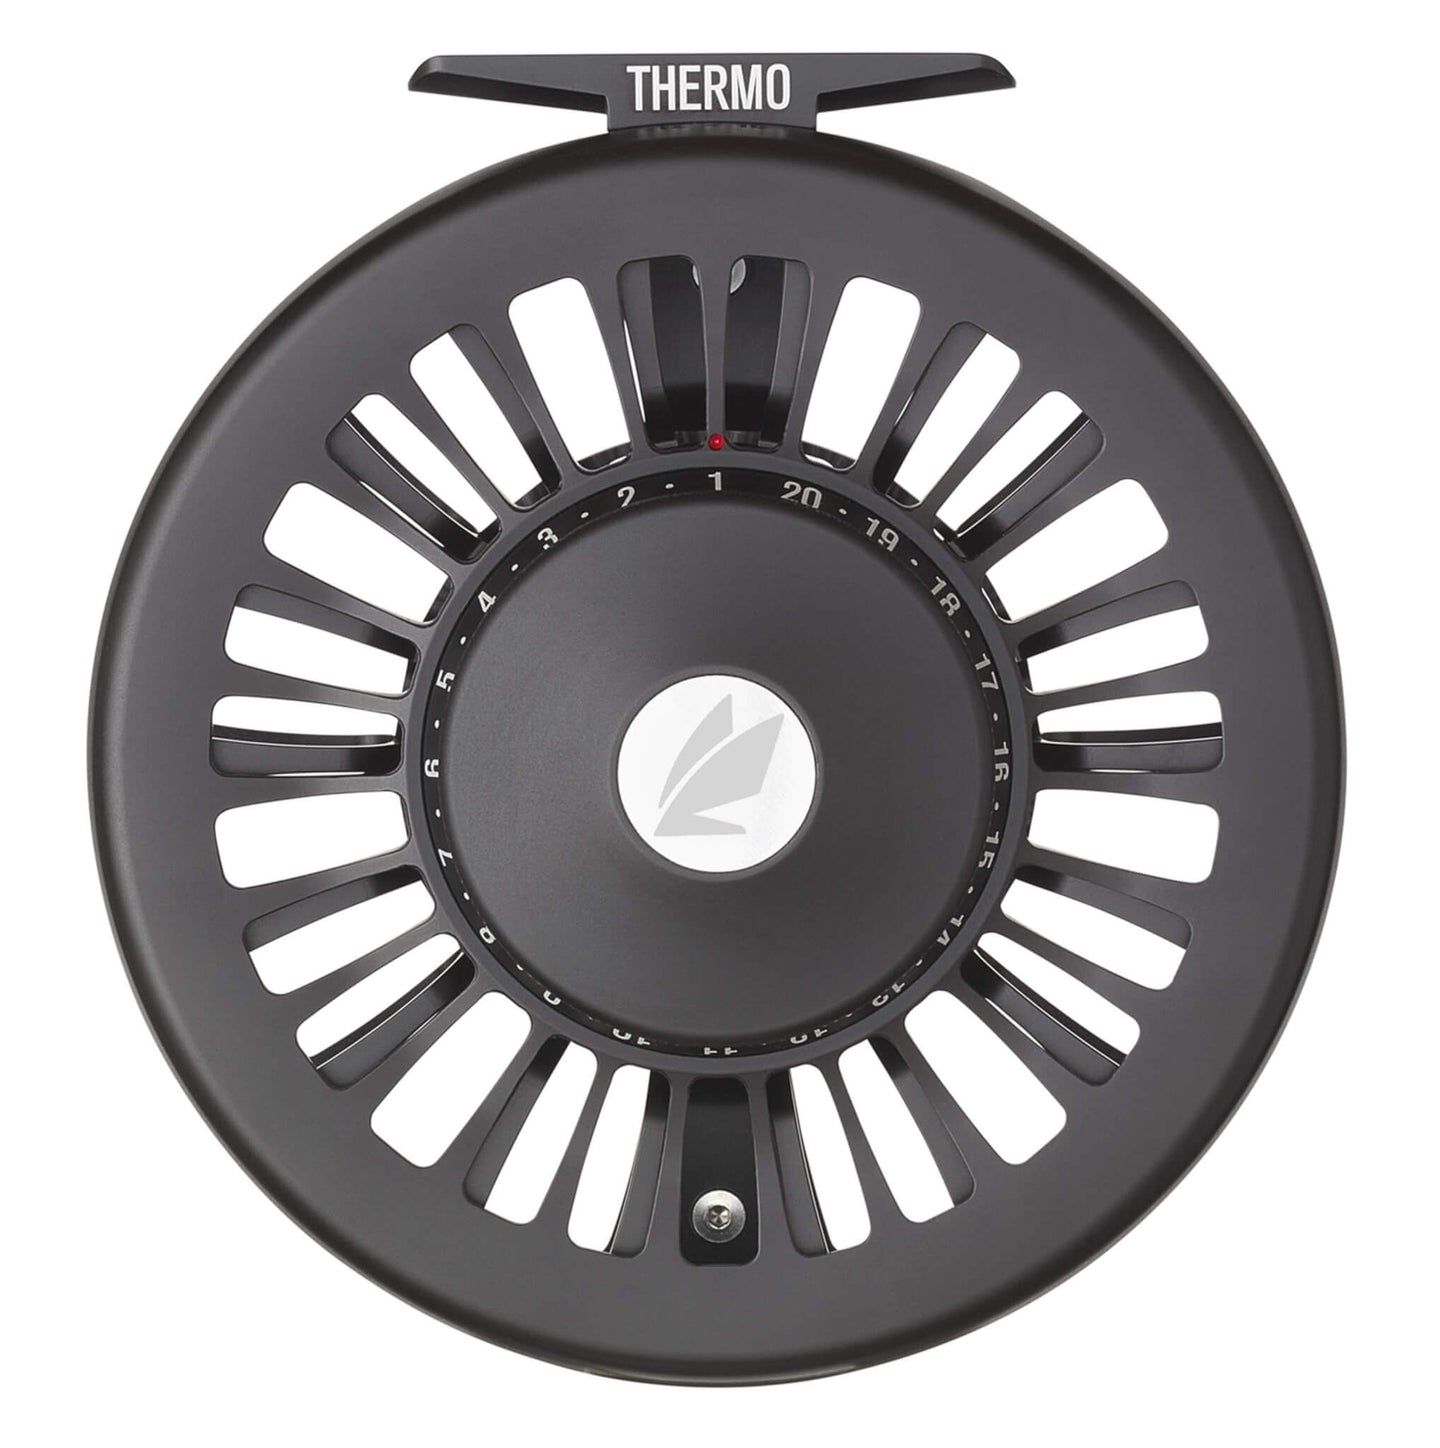 Sage Thermo Reel